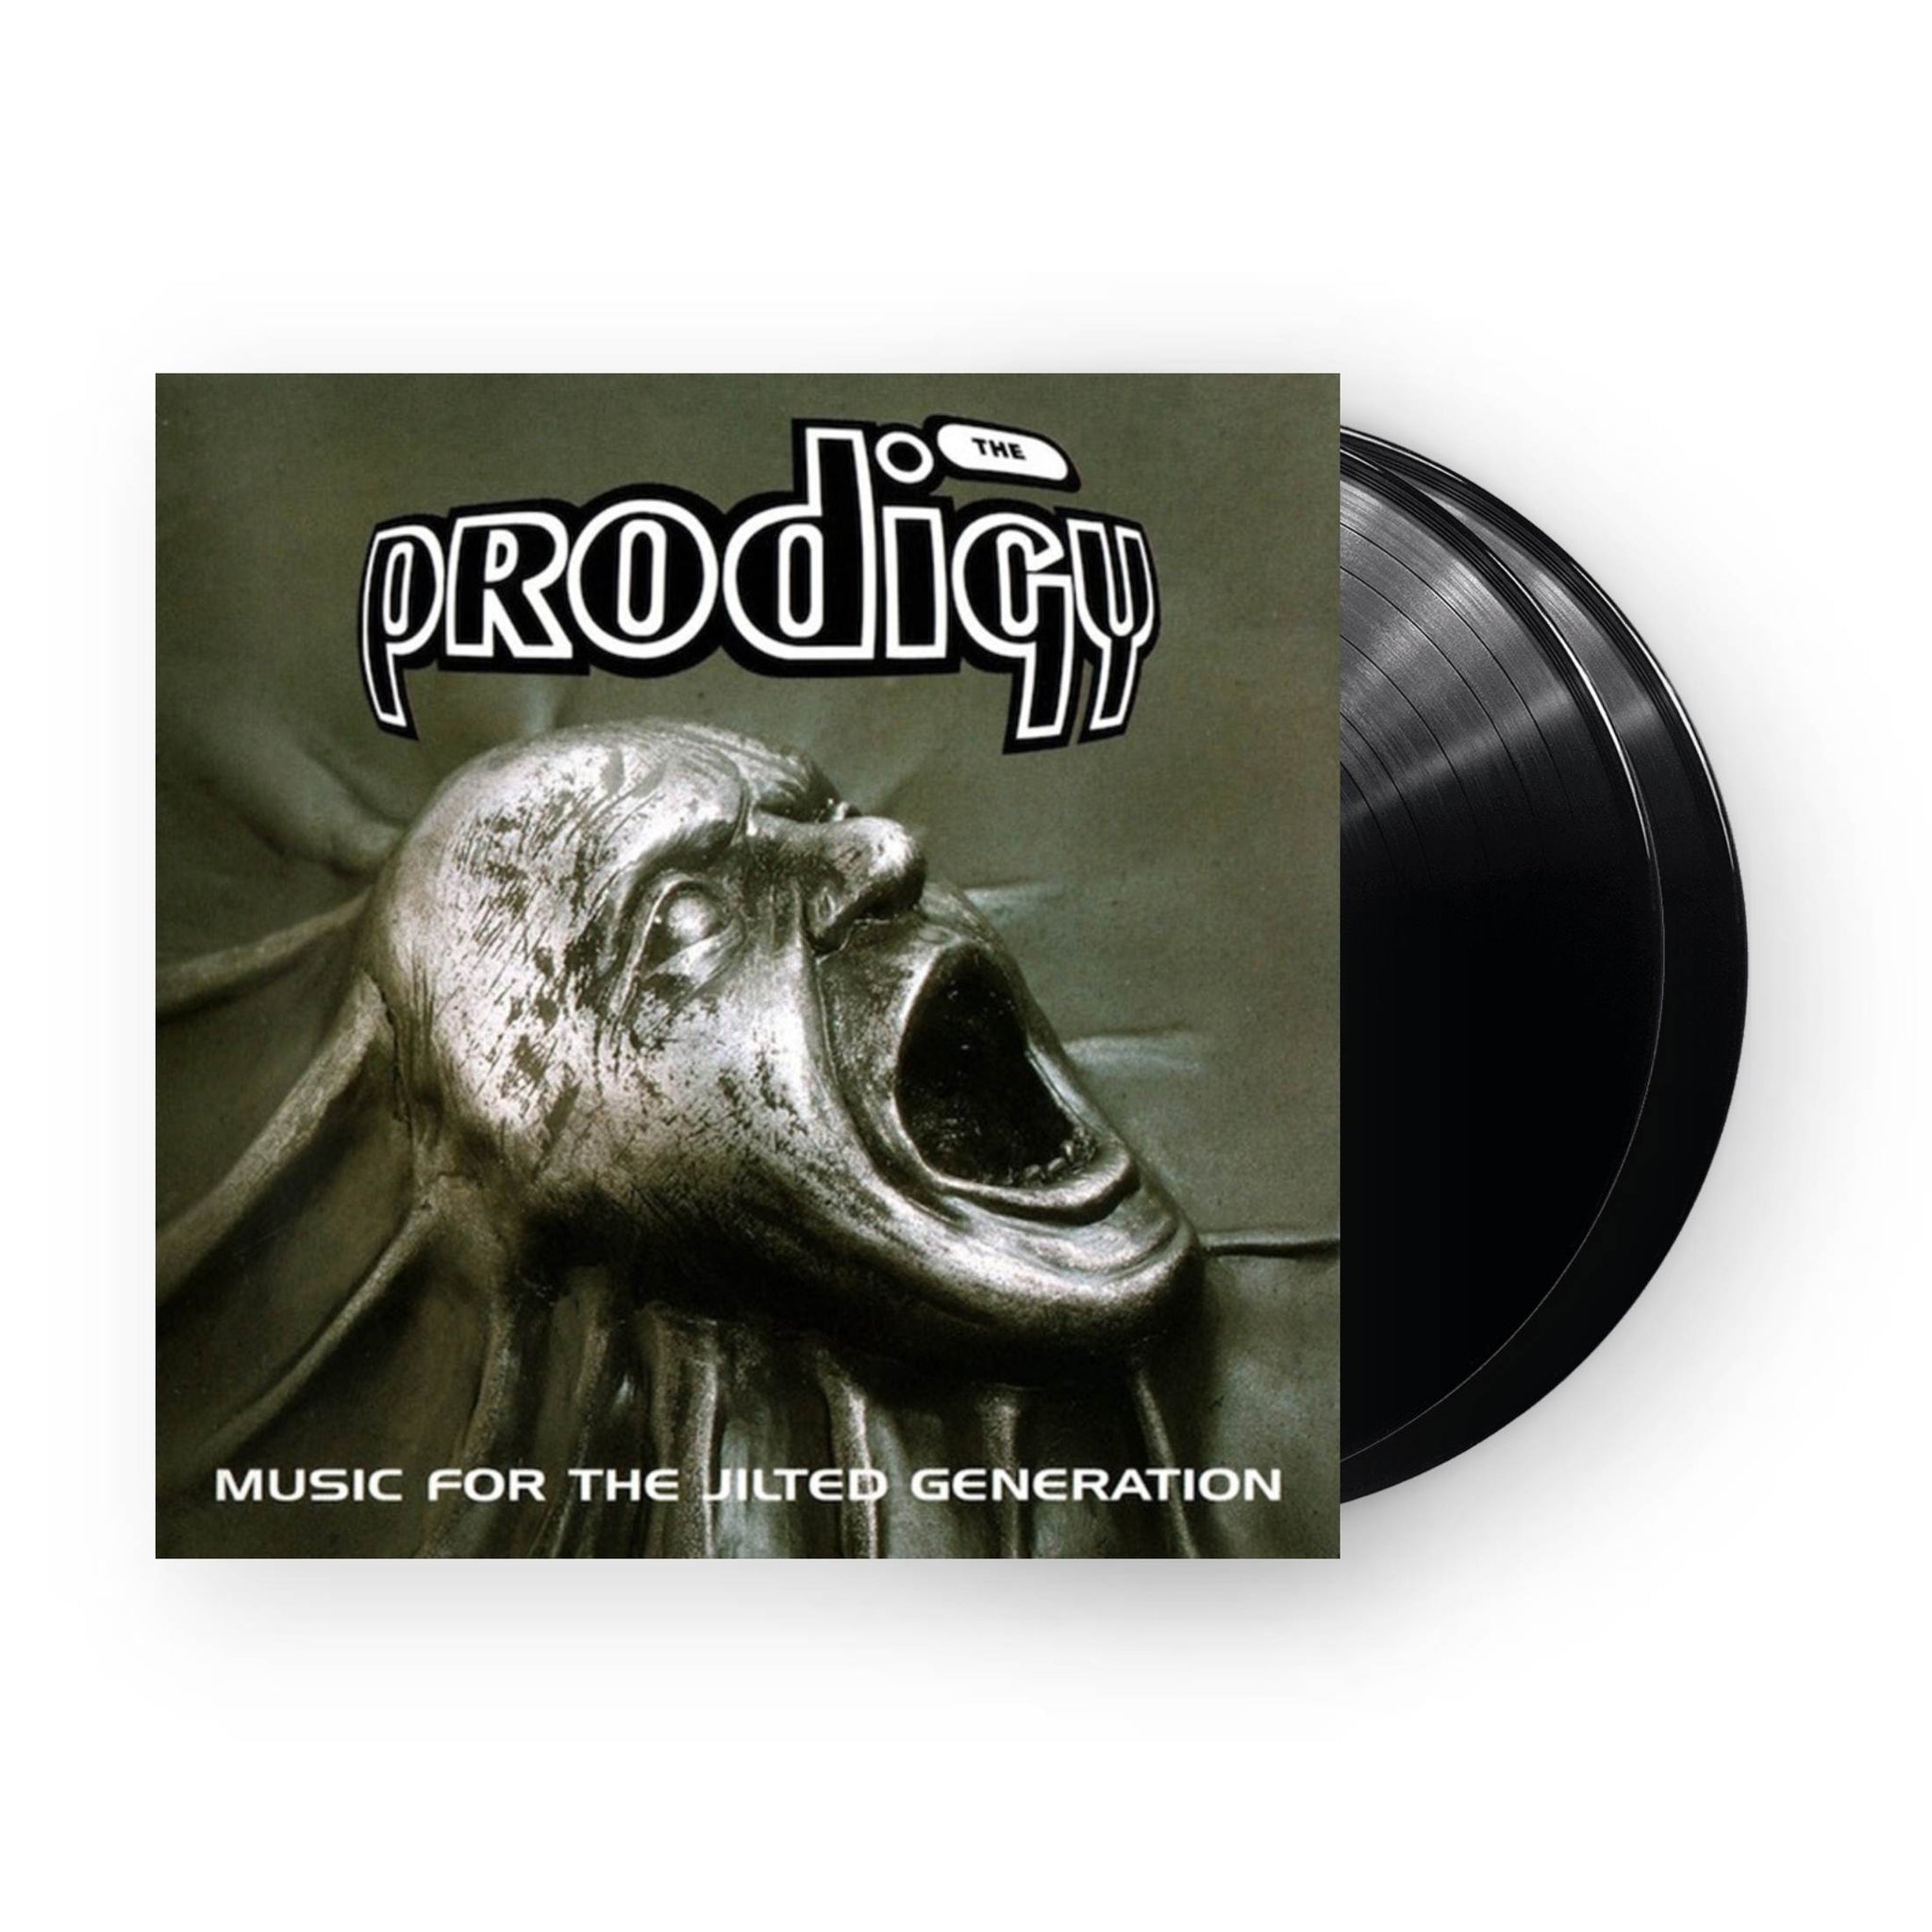 The Prodigy - Music For The Jilted Generation 2xLP (Black Vinyl)